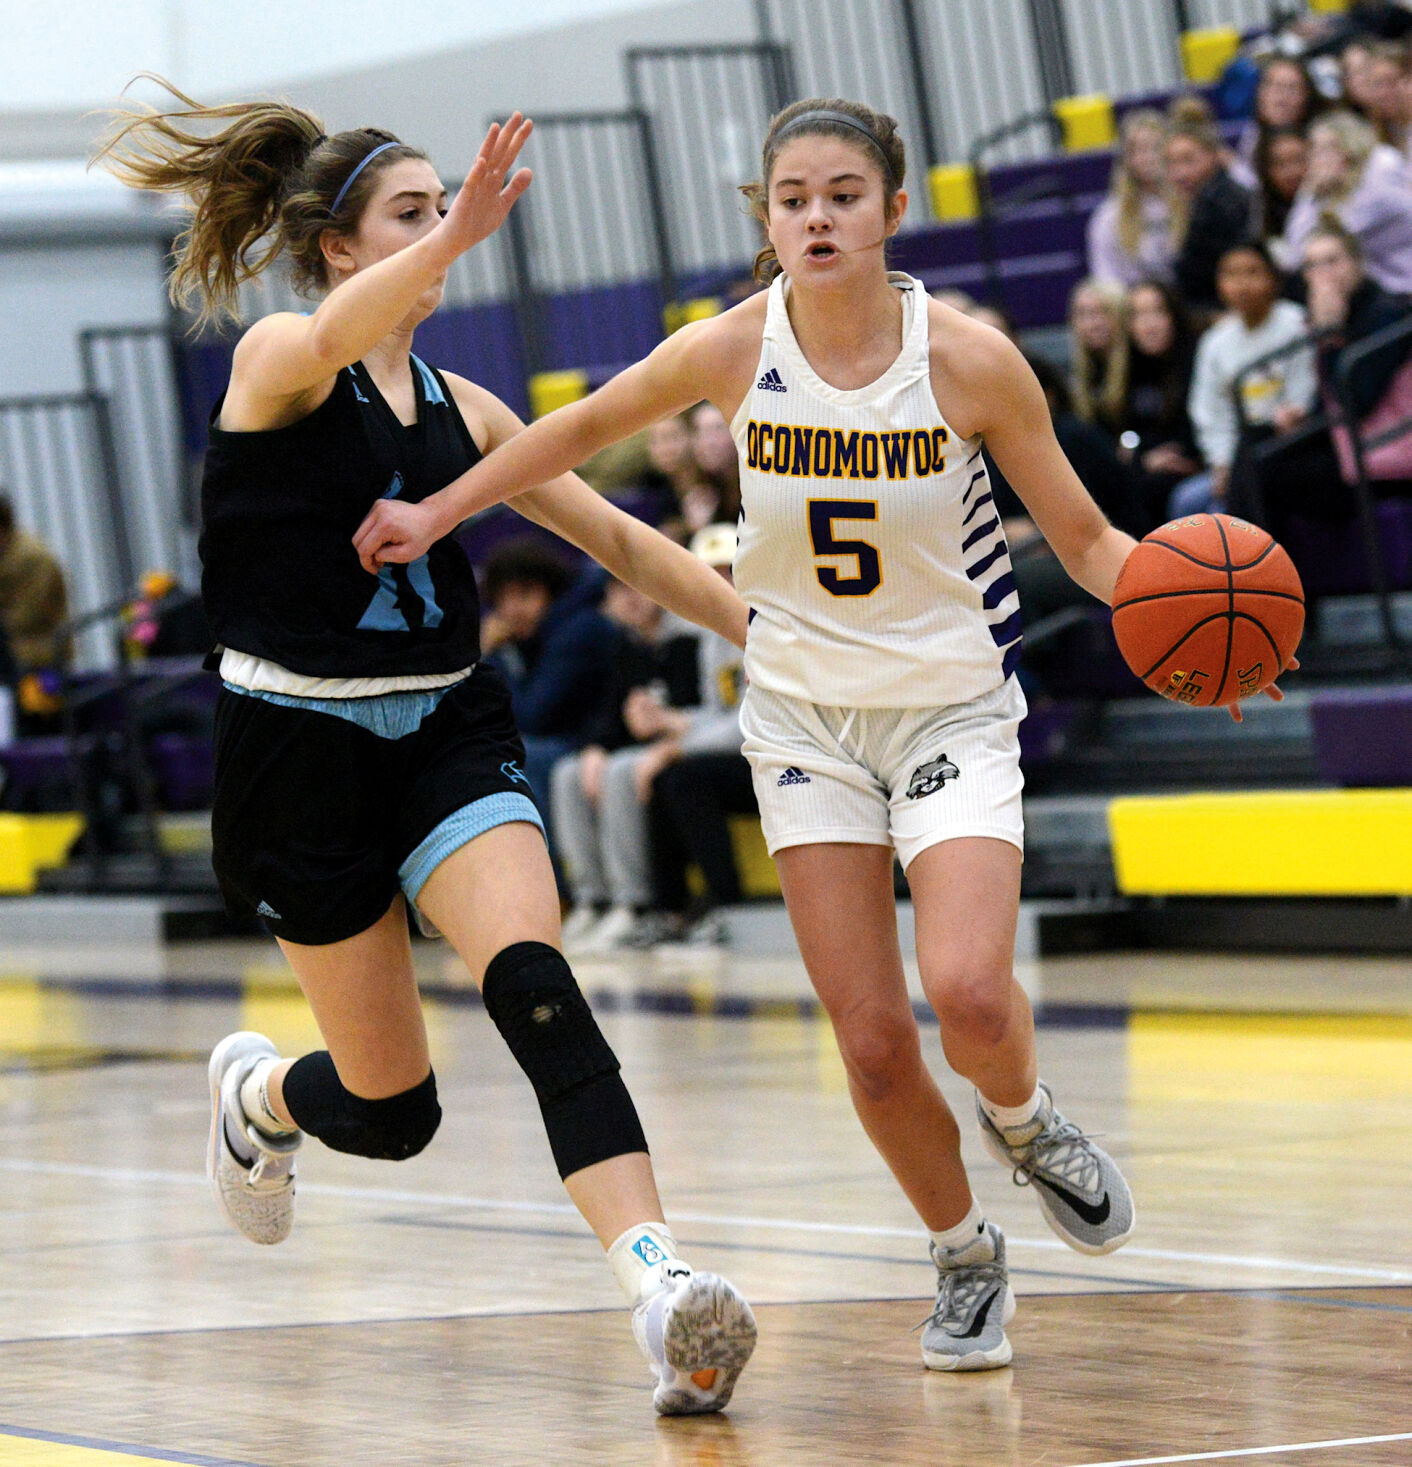 Oconomowoc Girls Basketball Team Shows Promise for Upcoming Season After Strong Finish